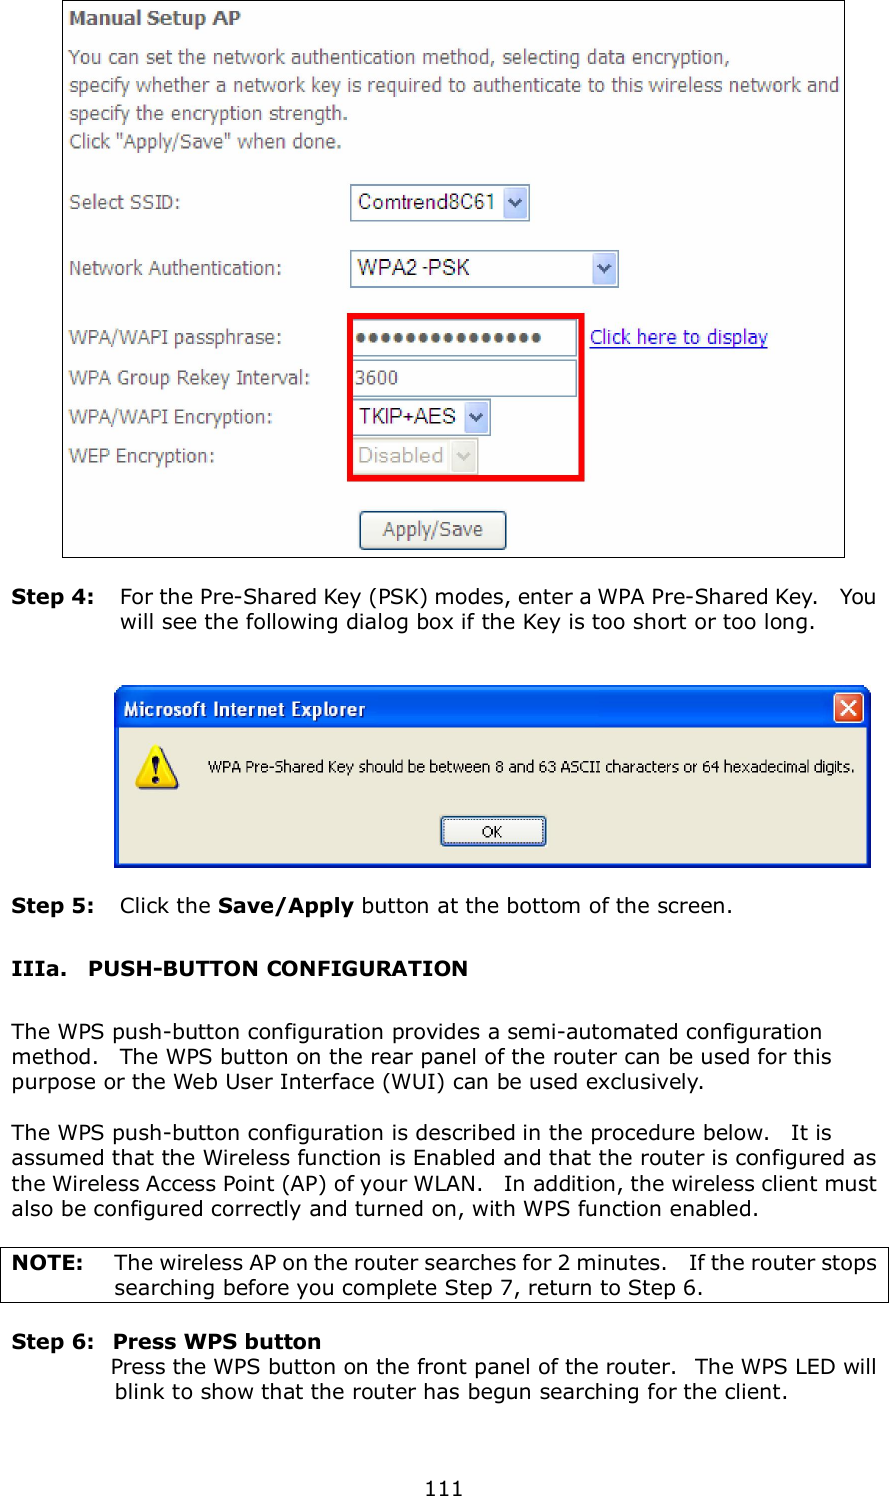  111     Step 4:  For the Pre-Shared Key (PSK) modes, enter a WPA Pre-Shared Key.    You will see the following dialog box if the Key is too short or too long.        Step 5:  Click the Save/Apply button at the bottom of the screen. IIIa.    PUSH-BUTTON CONFIGURATION The WPS push-button configuration provides a semi-automated configuration method.    The WPS button on the rear panel of the router can be used for this purpose or the Web User Interface (WUI) can be used exclusively.      The WPS push-button configuration is described in the procedure below.    It is assumed that the Wireless function is Enabled and that the router is configured as the Wireless Access Point (AP) of your WLAN.    In addition, the wireless client must also be configured correctly and turned on, with WPS function enabled.  NOTE:  The wireless AP on the router searches for 2 minutes.   If the router stops searching before you complete Step 7, return to Step 6.  Step 6:   Press WPS button               Press the WPS button on the front panel of the router.   The WPS LED will blink to show that the router has begun searching for the client.    